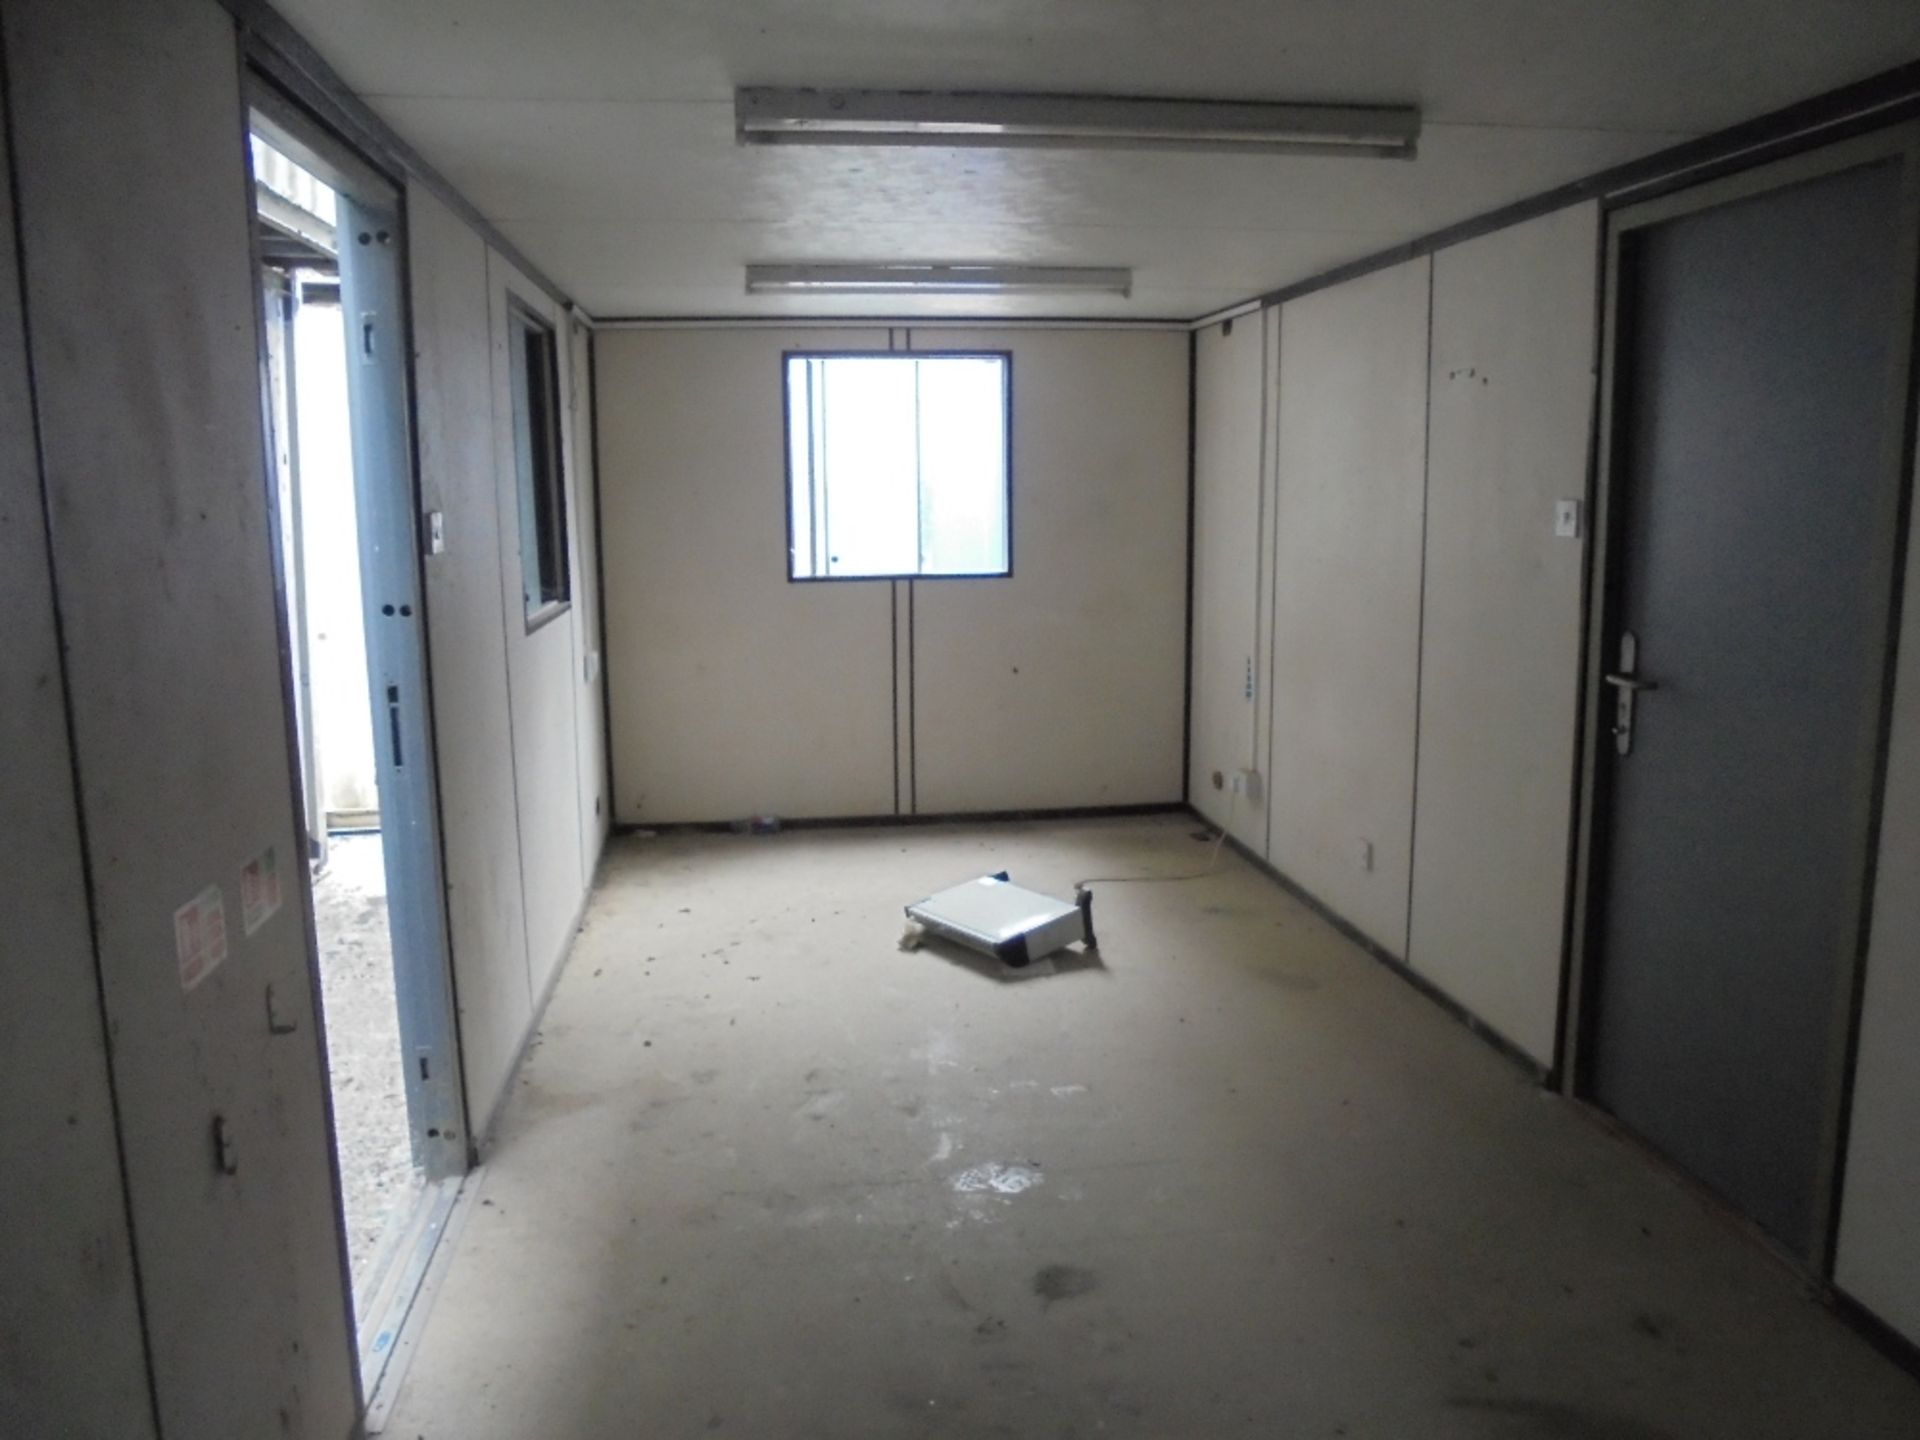 WSO1530 24ft x 9ft Anti Vandal Office - Image 6 of 7